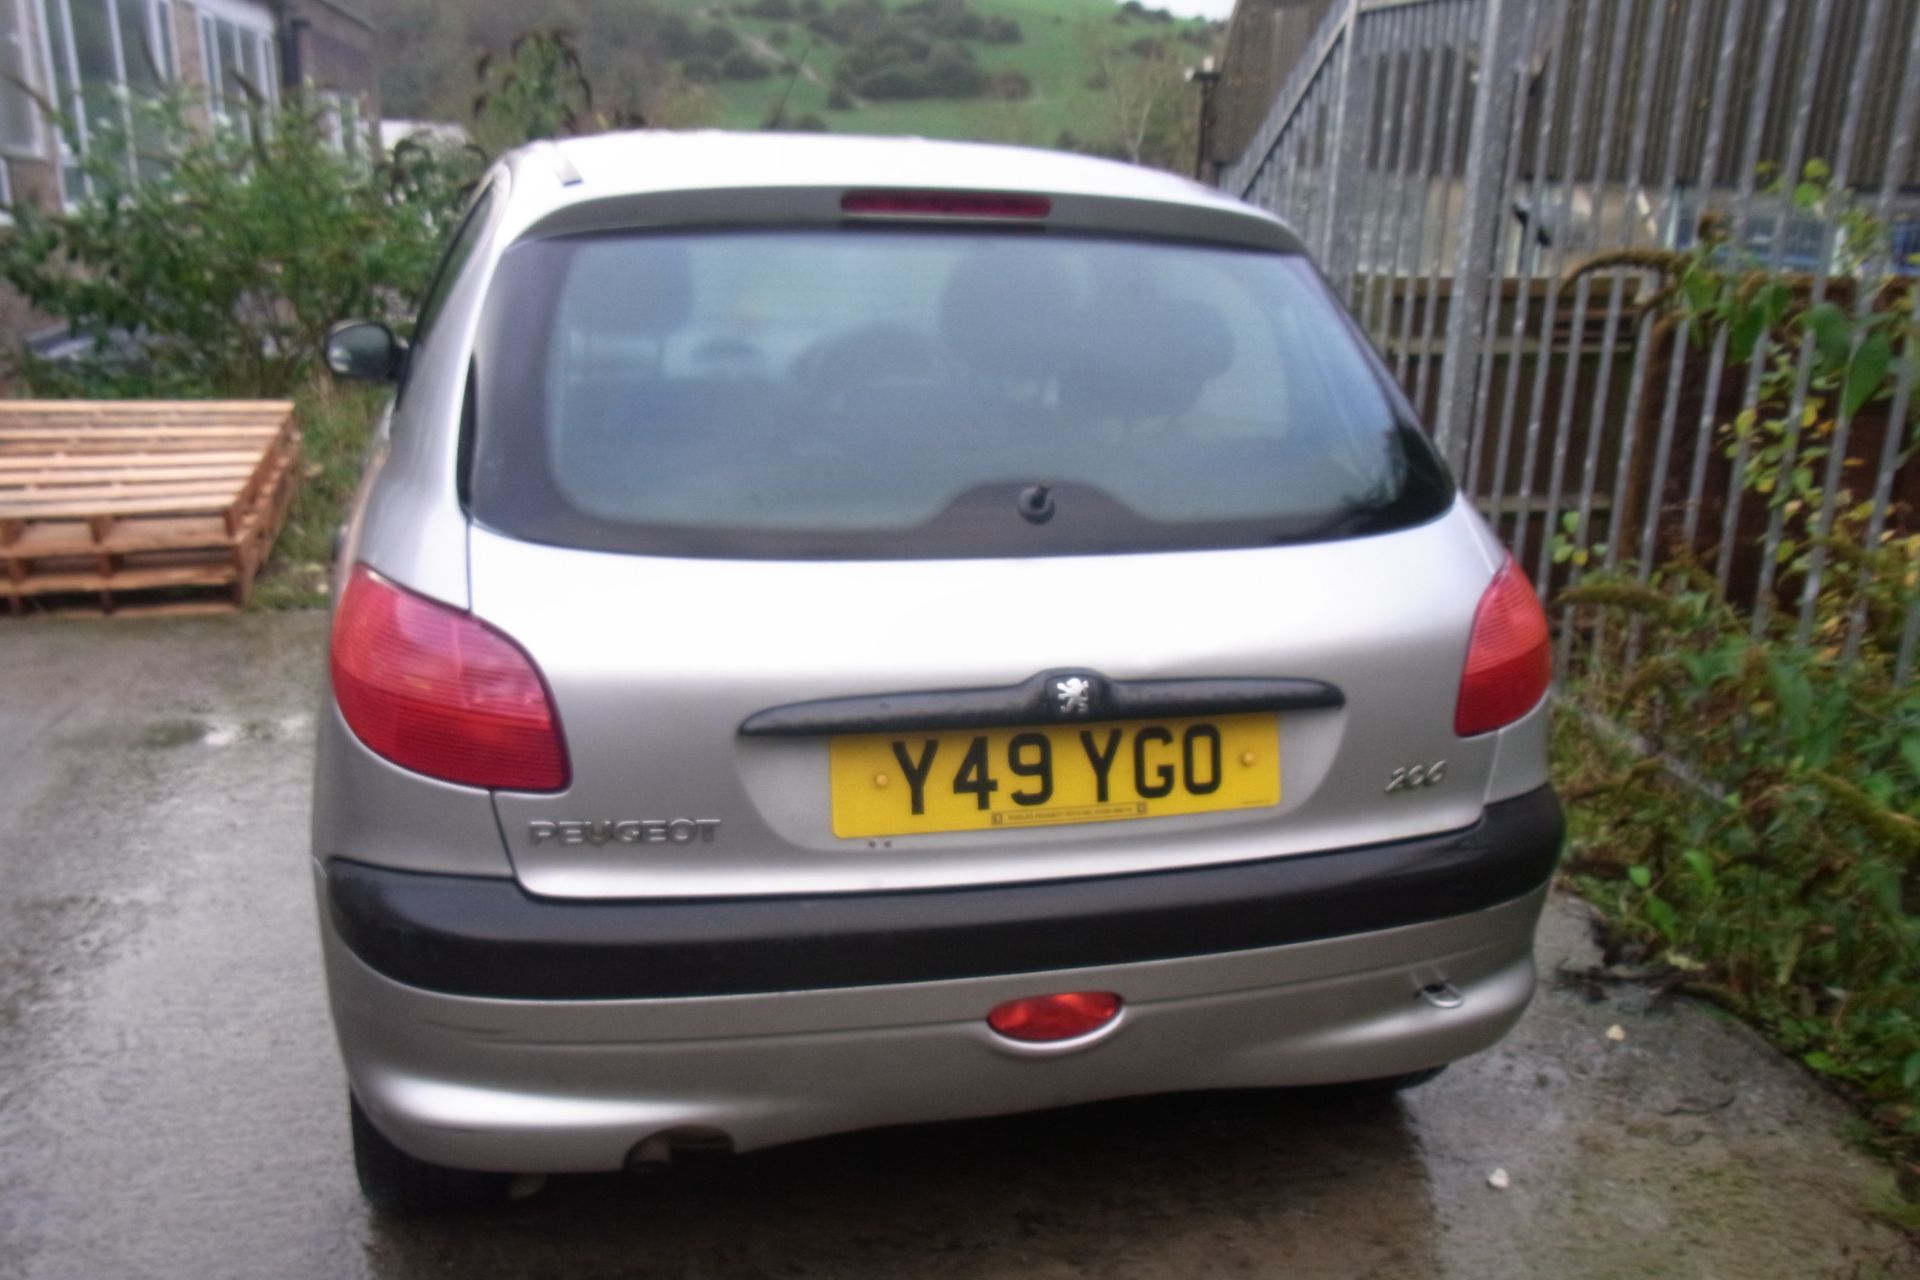 Y49 YGO - Peugeot 206 - Image 3 of 3